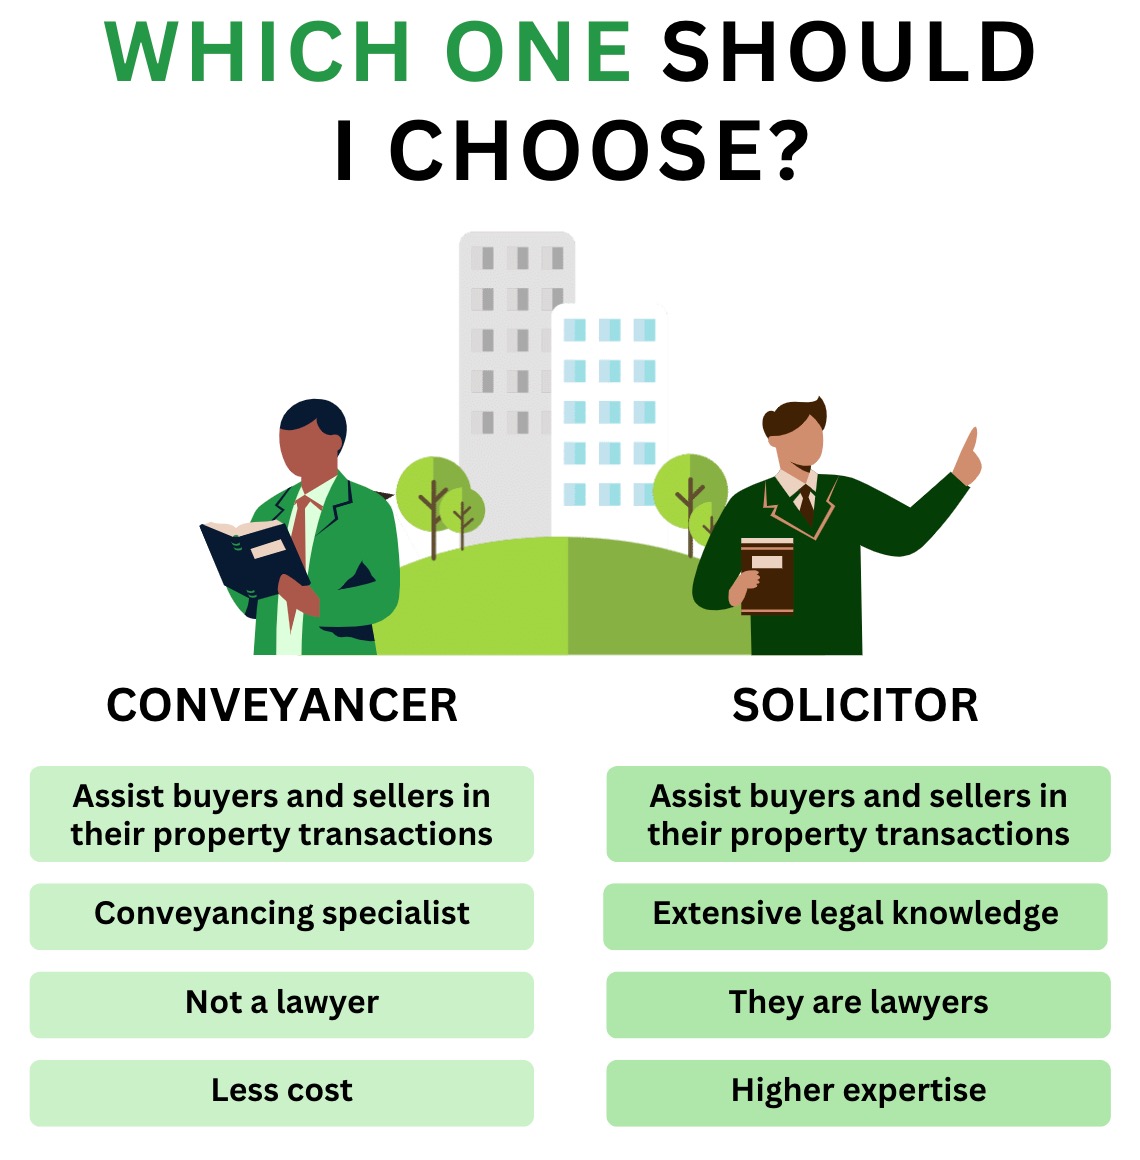 conveyancer vs solicitor which should I choose